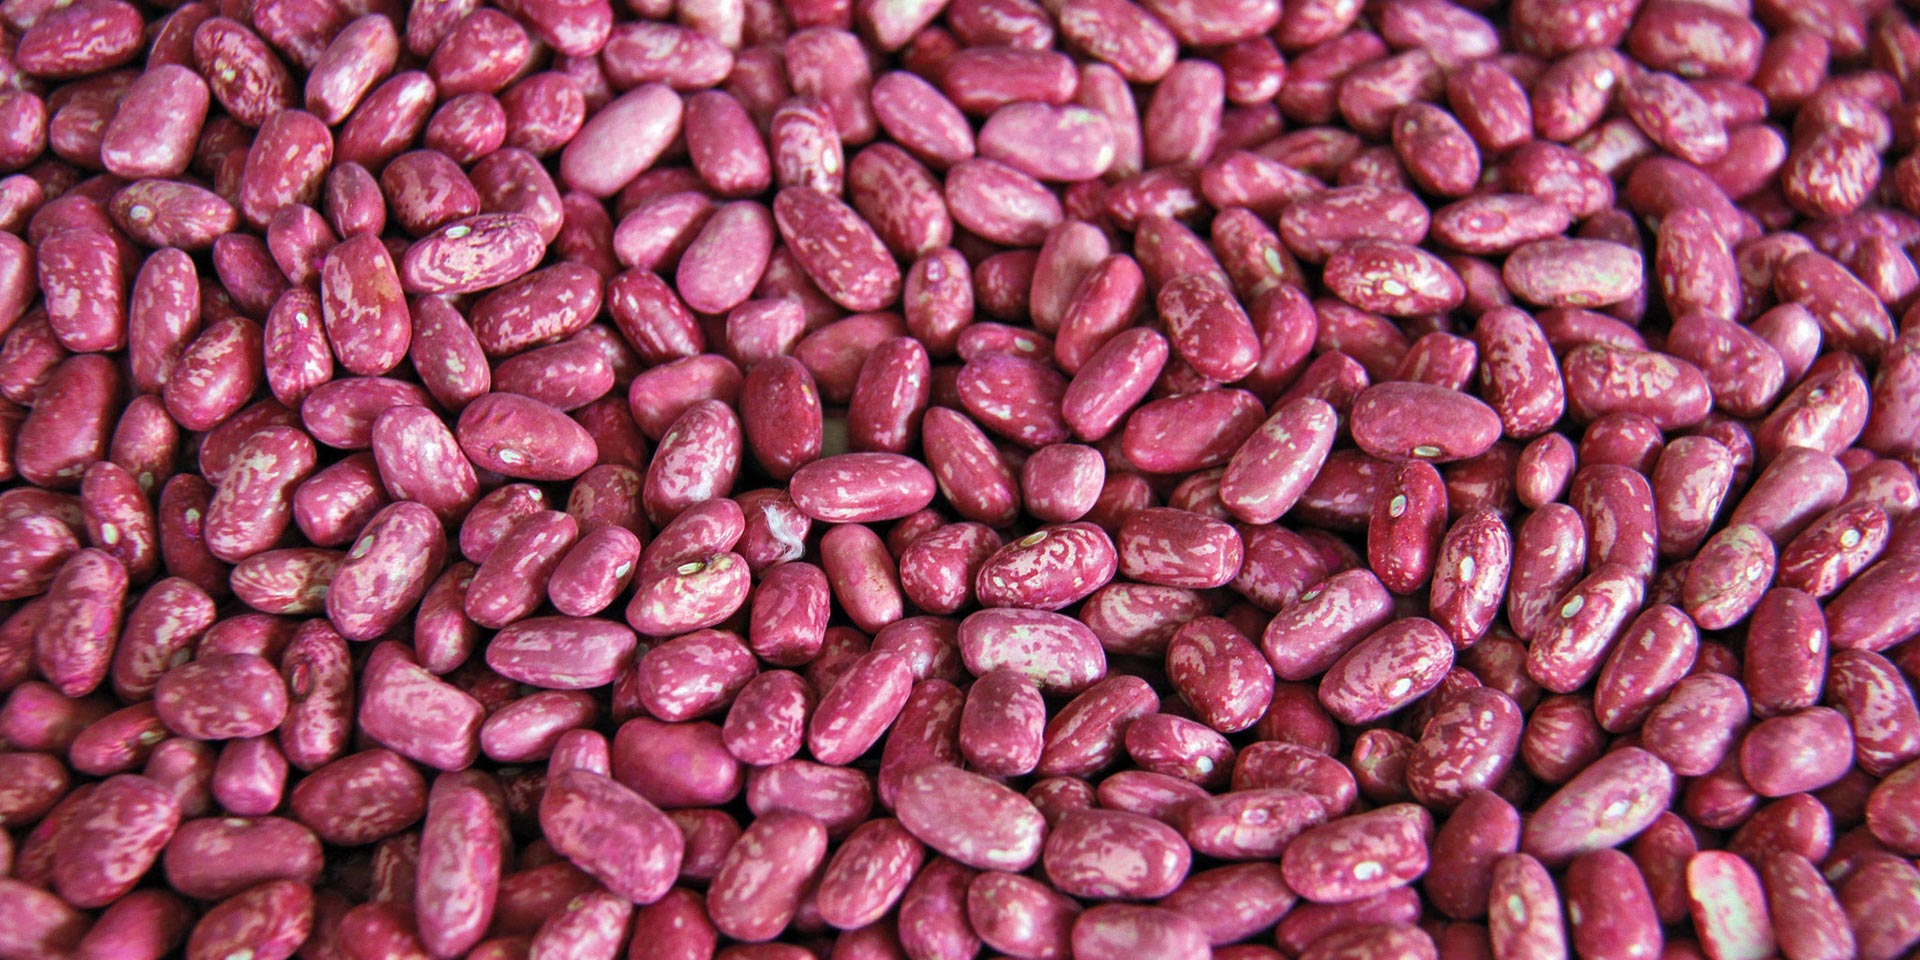 Close-up of speckled red beans.